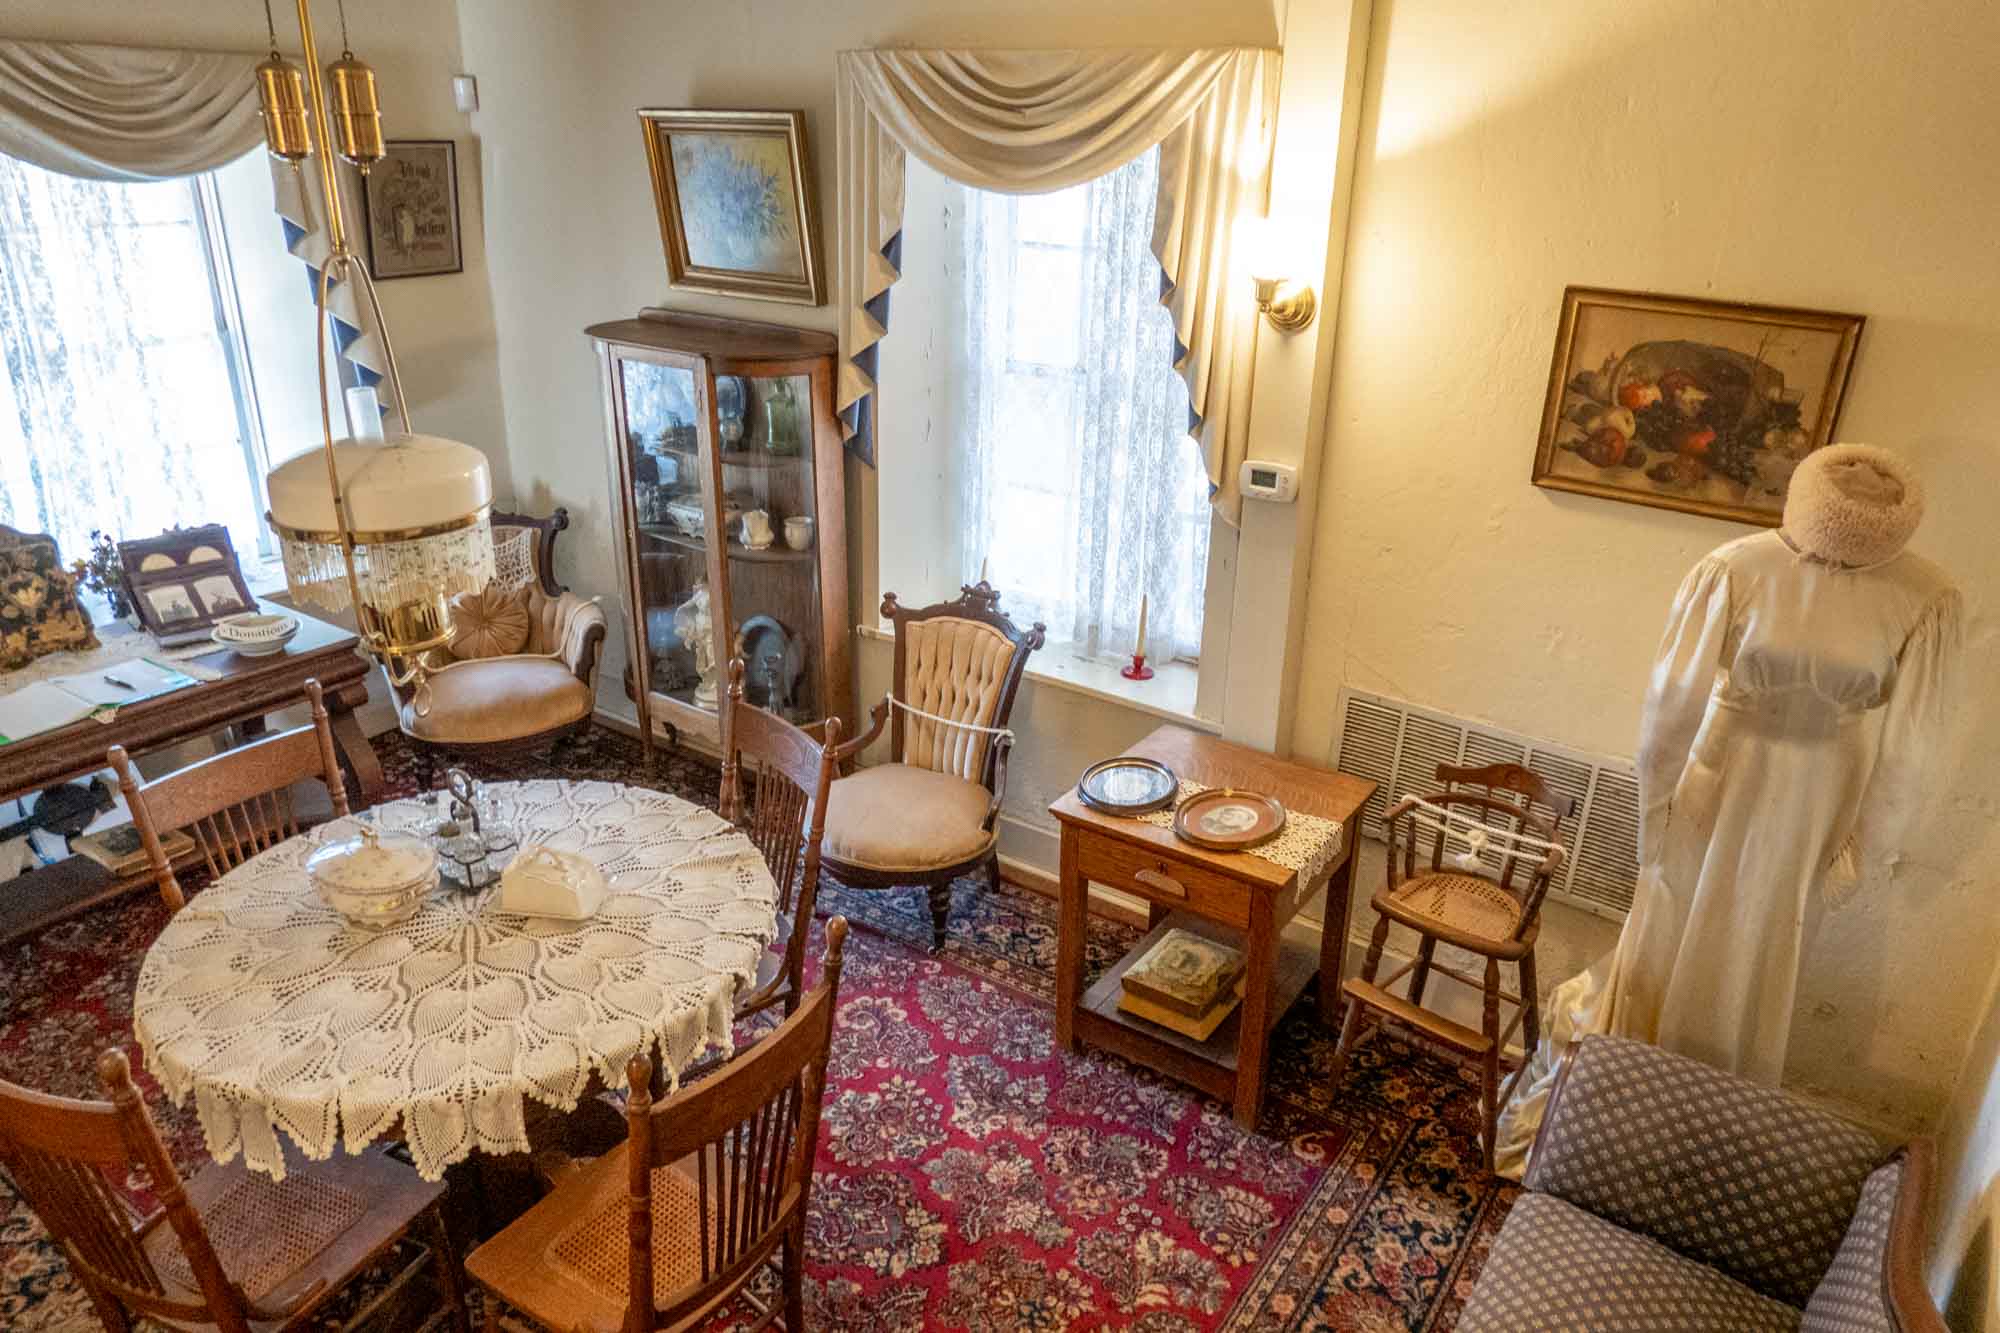 Room with antique table, chairs, dishes, and an old-fashioned white dress on display